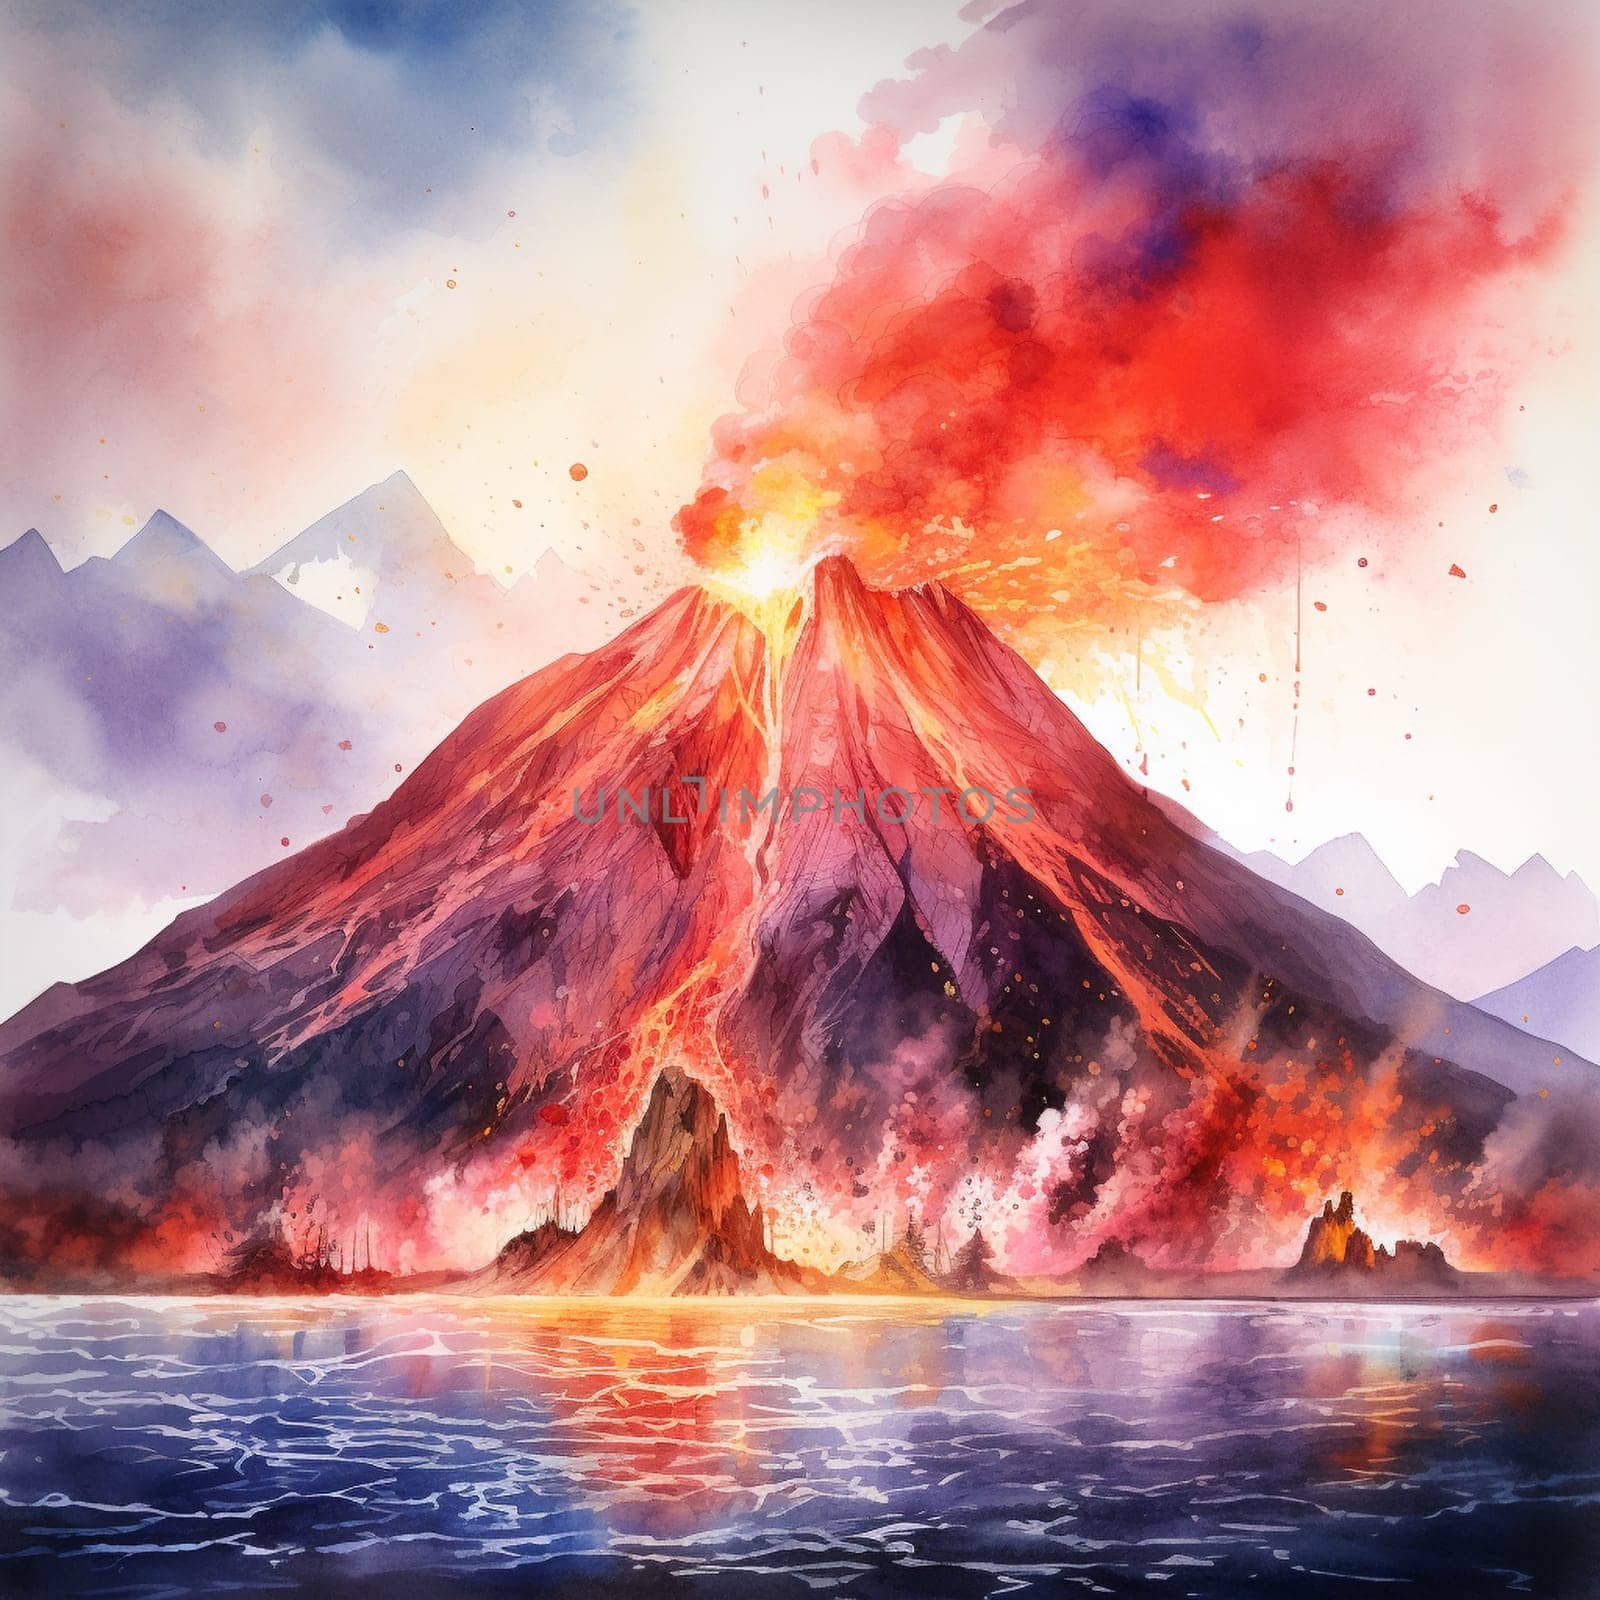 Immerse yourself in the delicate watercolor art style of 'Molten Symphony', an image inspired by the dramatic beauty of volcanic eruptions. With vibrant colors and fluid brushstrokes, this artwork ignites the imagination of viewers worldwide, capturing the raw power and awe-inspiring nature of these natural phenomena.